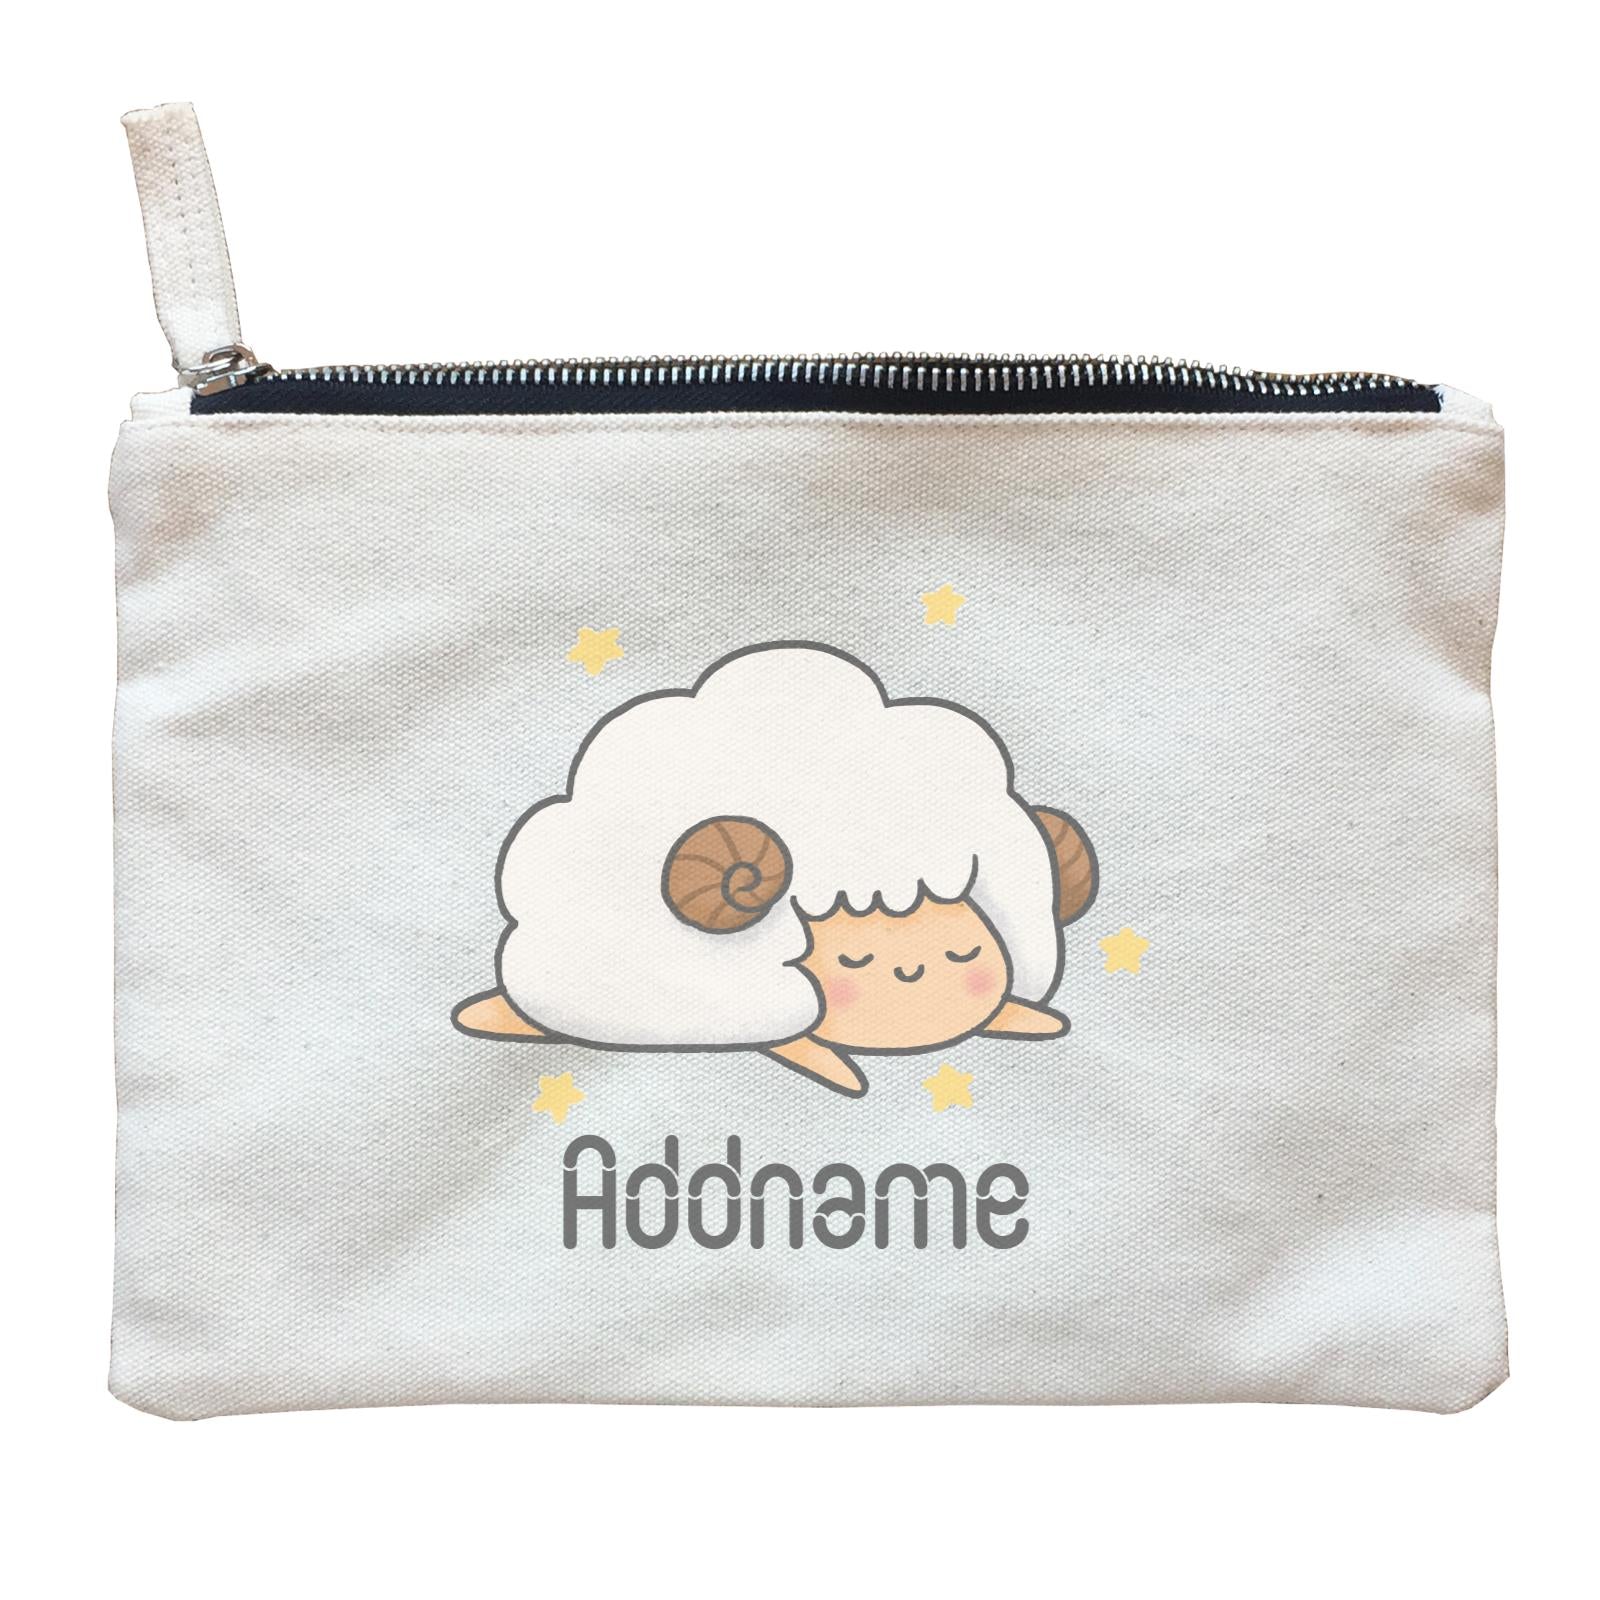 Cute Hand Drawn Style Sheep Addname Zipper Pouch